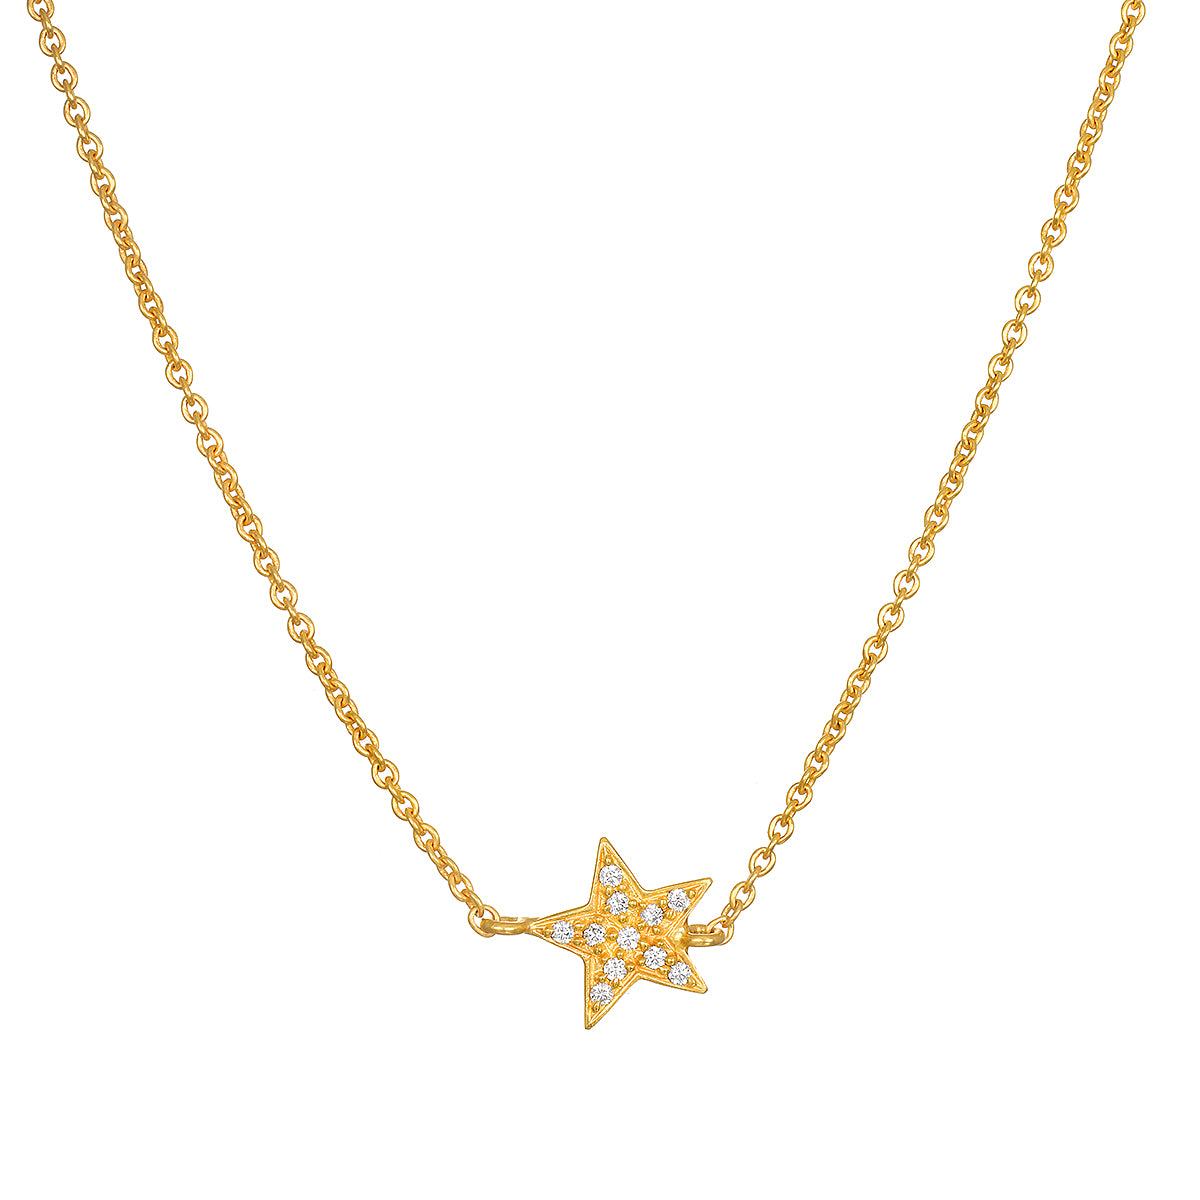 Shining Star Gold Necklace